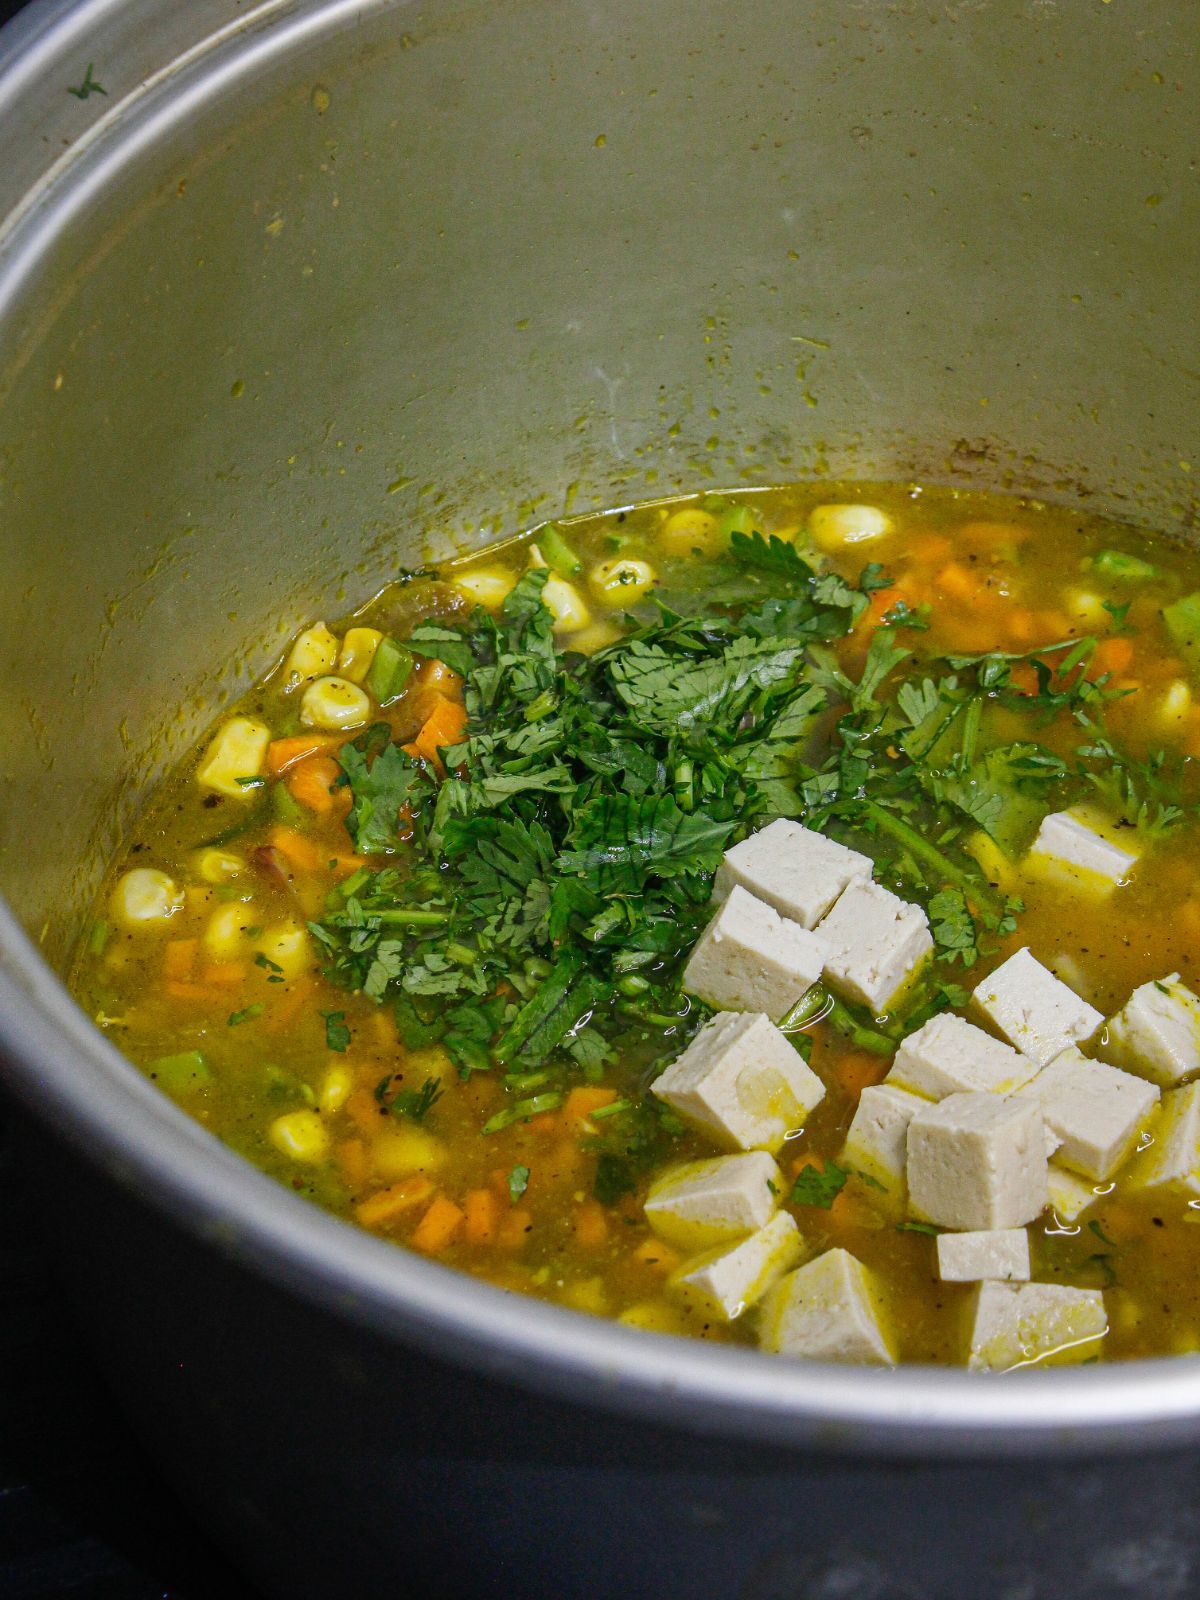 Add tofu cubes to the pot and cook well